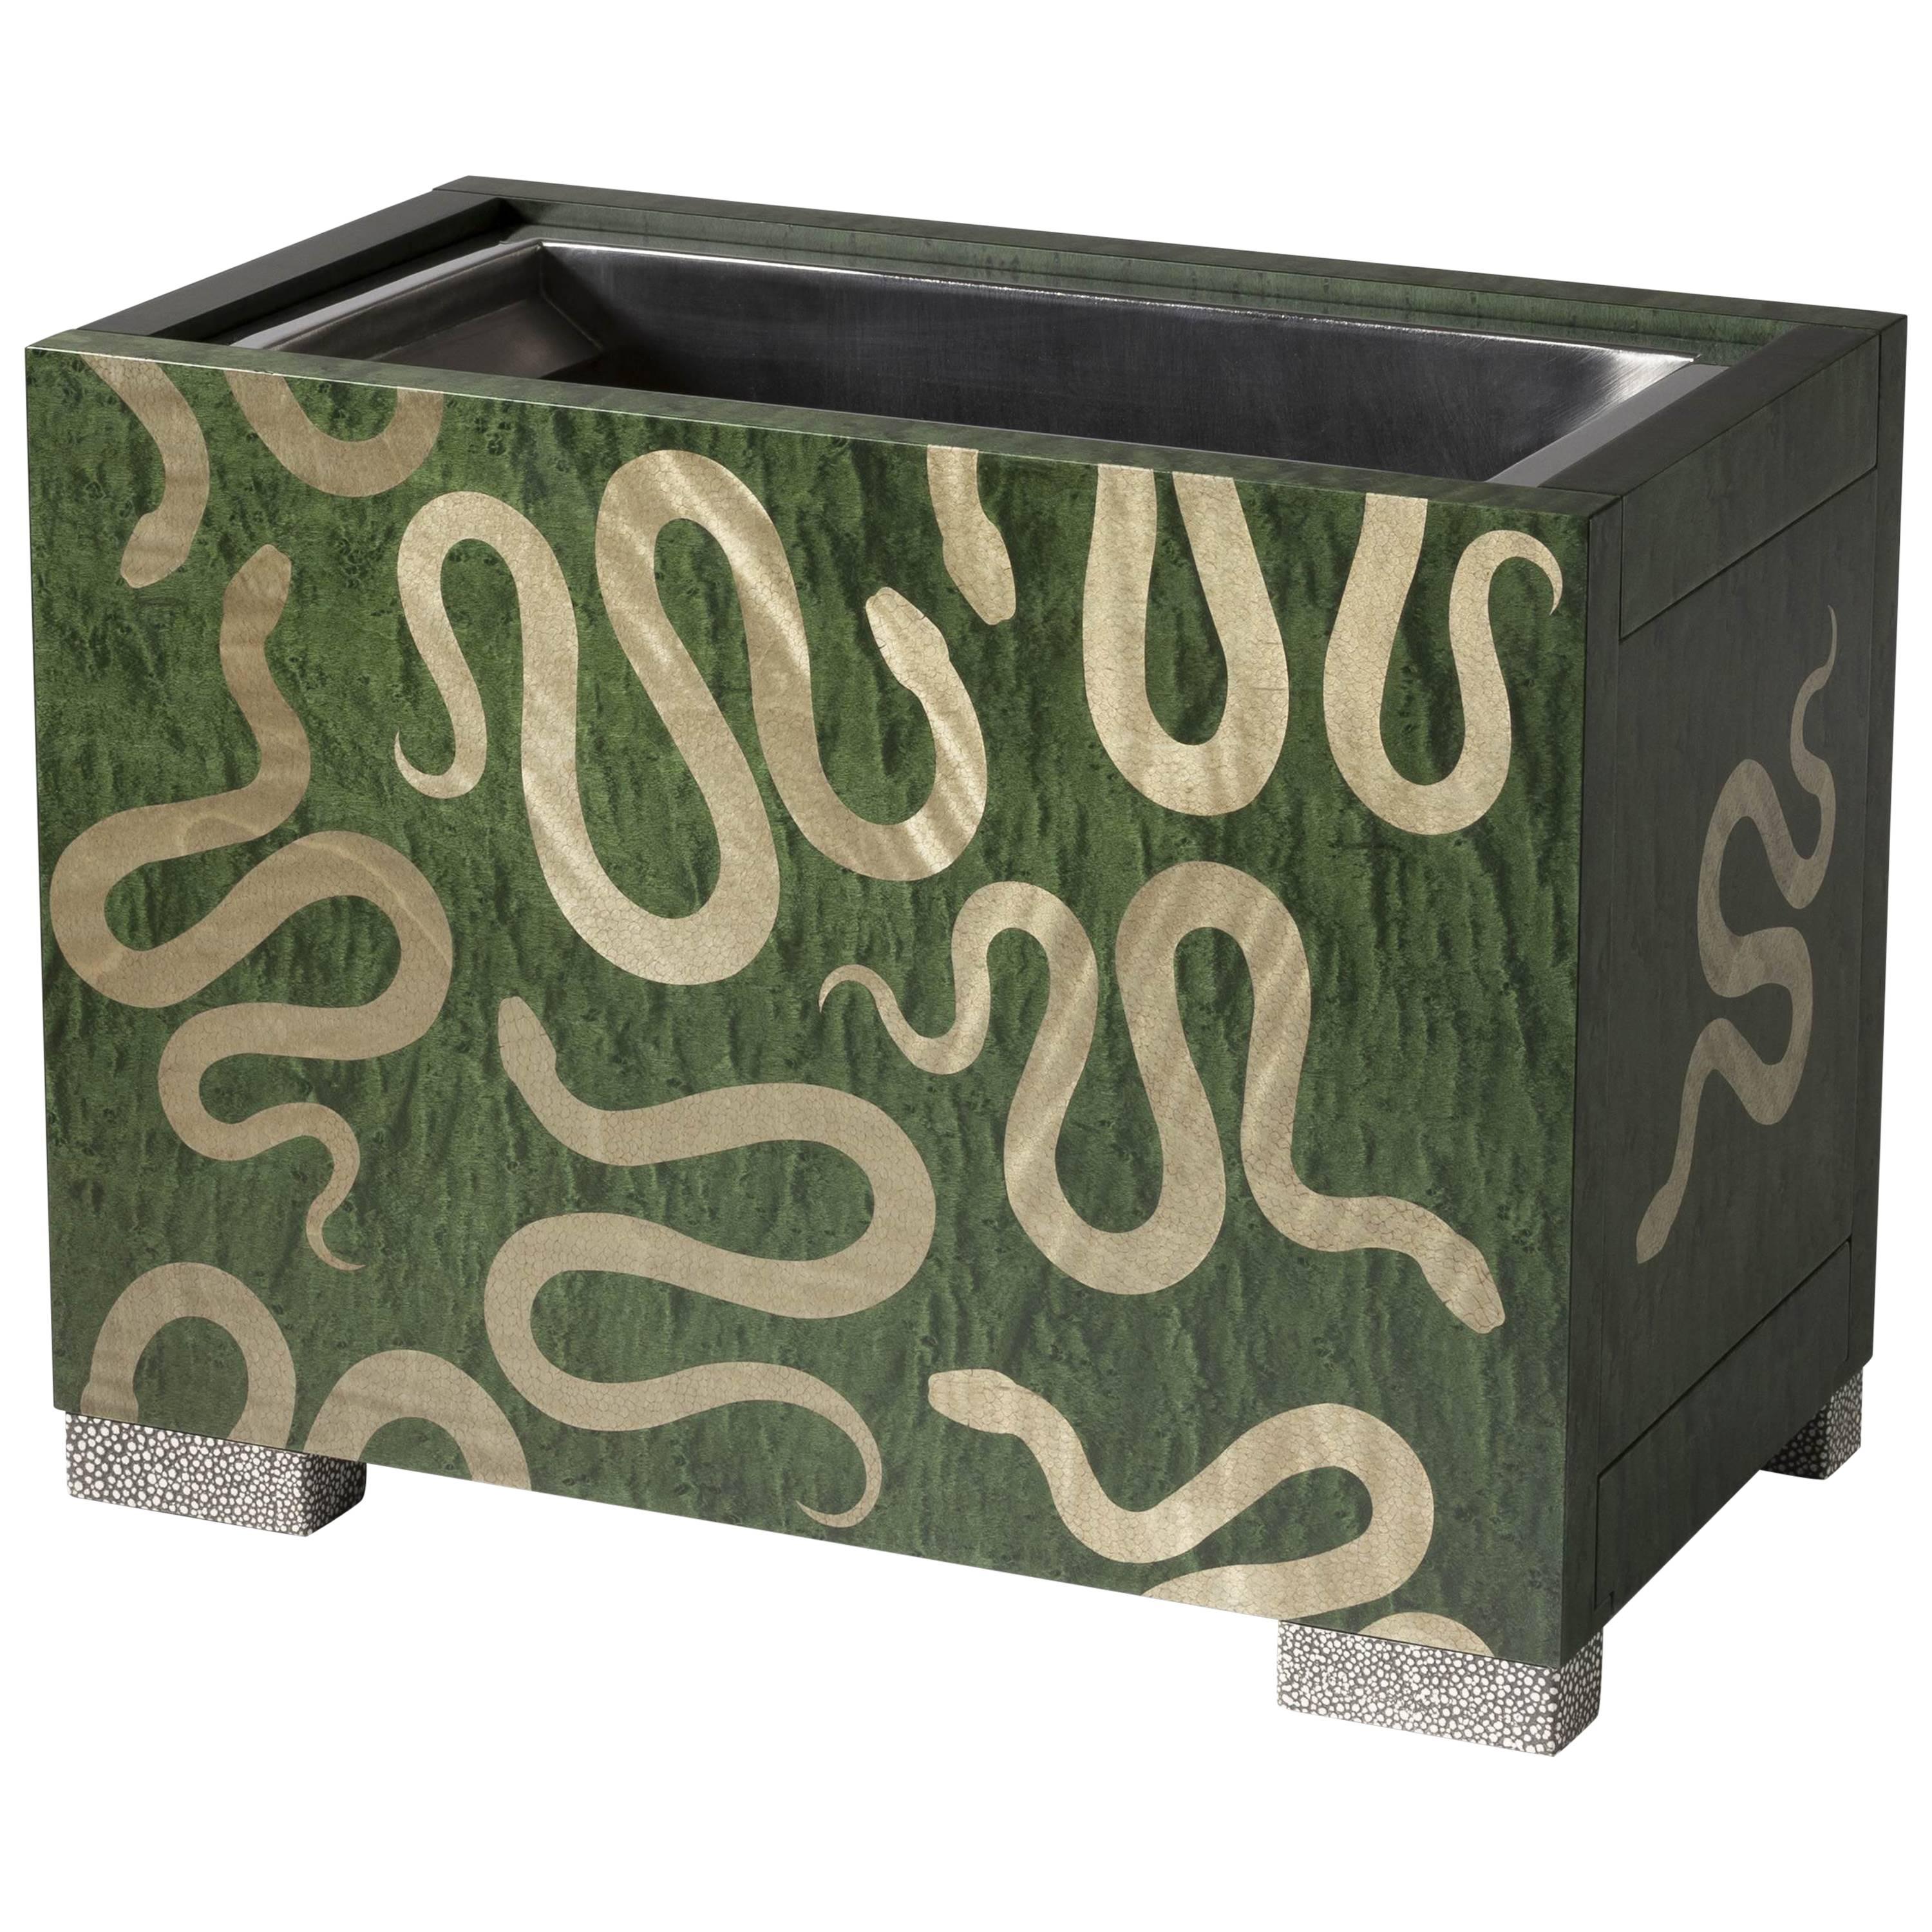 Zelouf + Bell, "Serpents, " Contemporary Champagne Cooler, Ireland, 2018